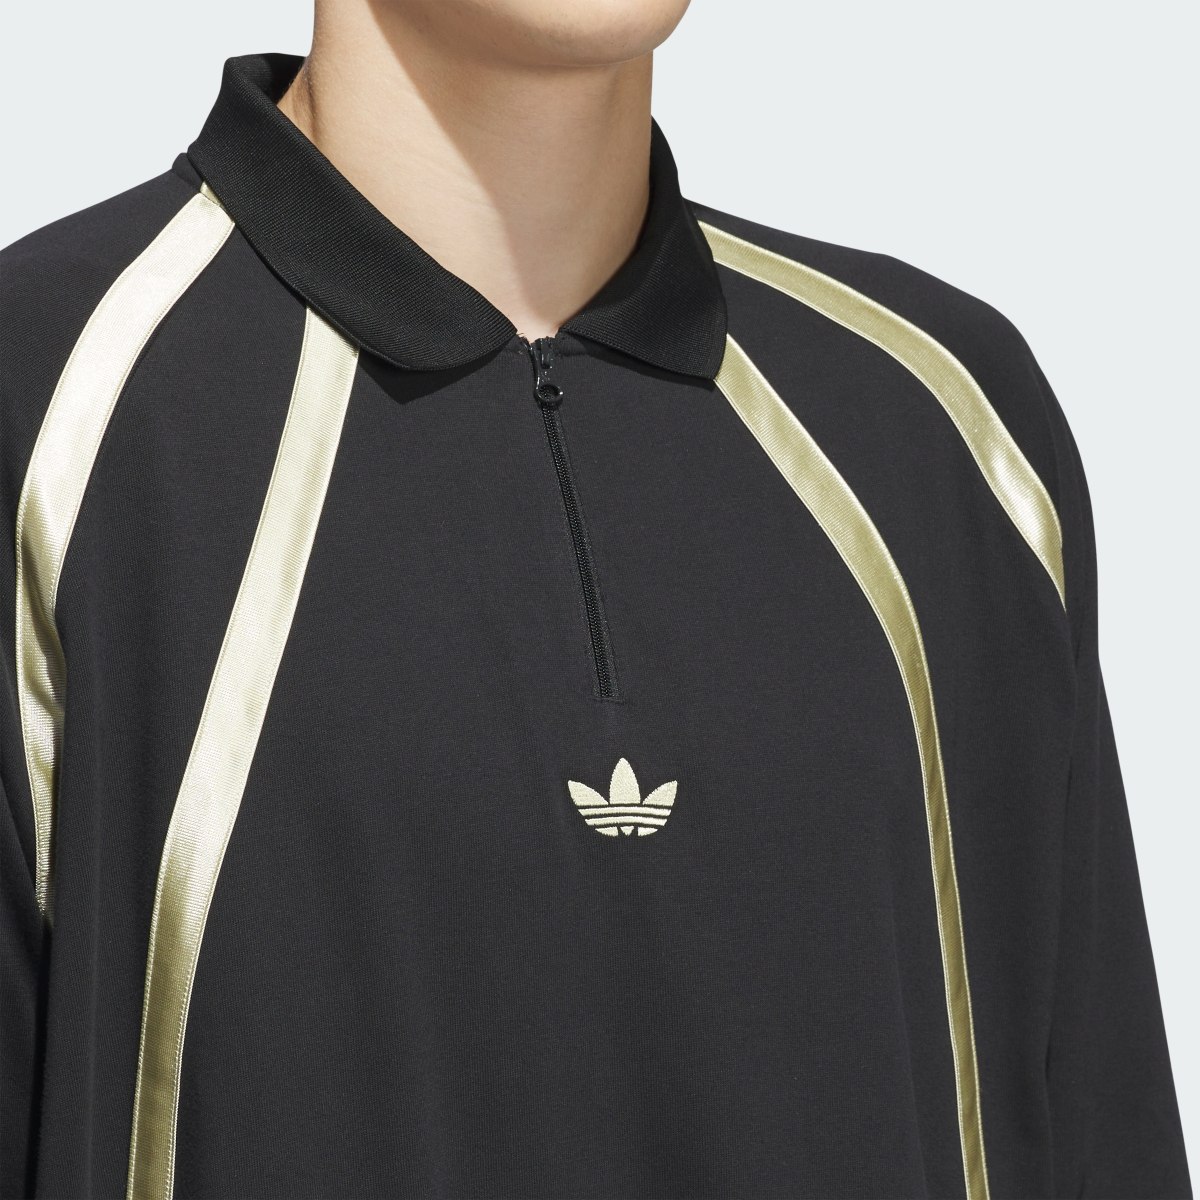 Adidas Rugby Long Sleeve Polo Shirt (Gender Neutral). 5